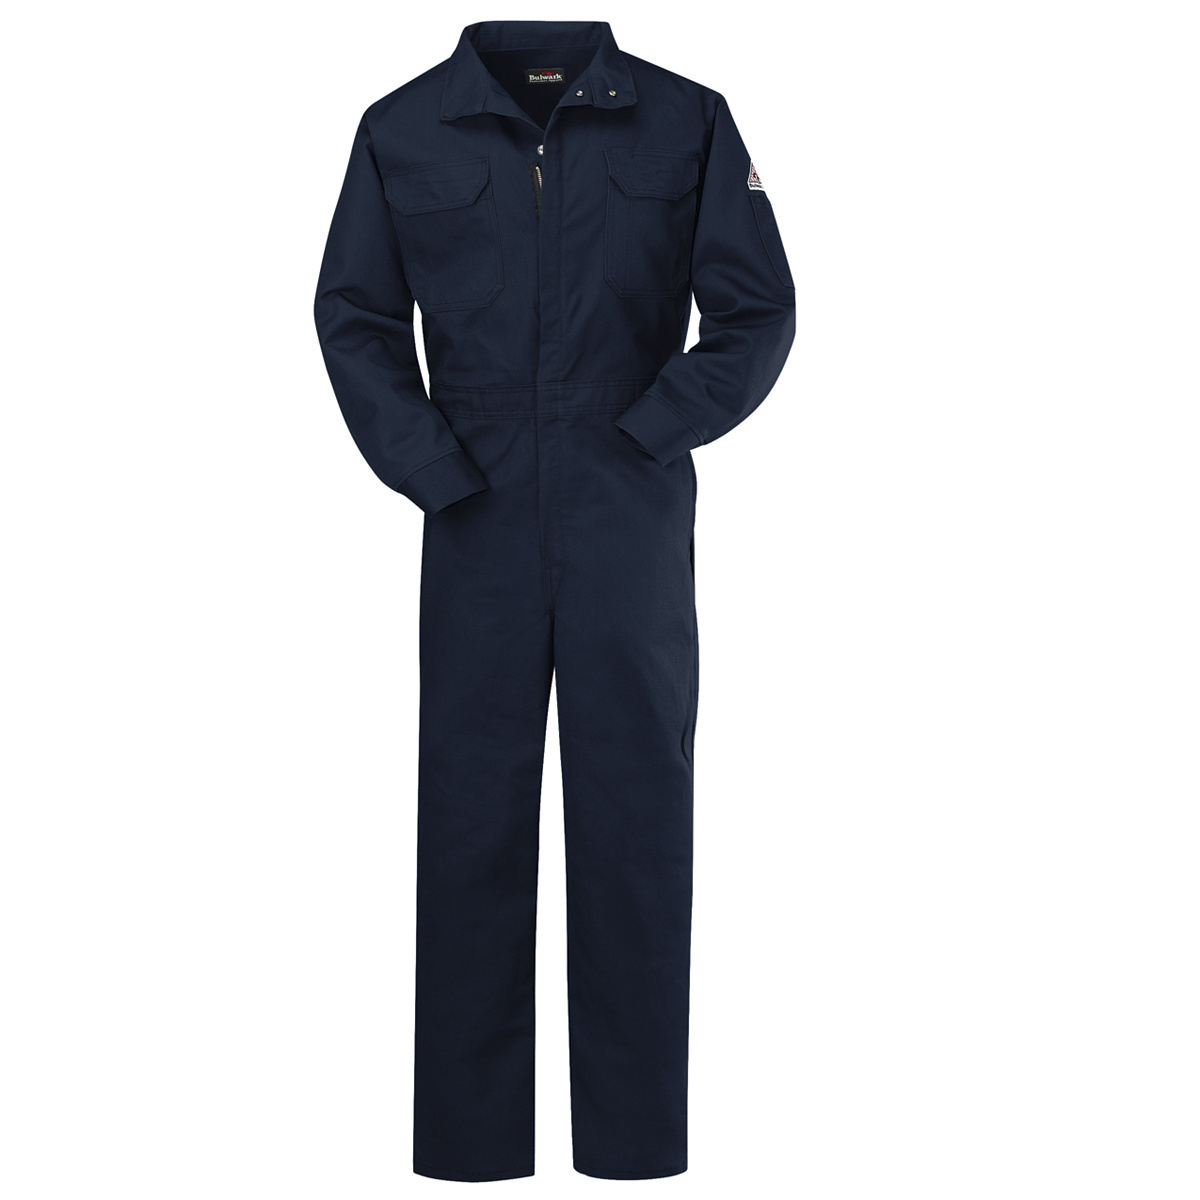 Bulwark® 58 Regular Navy Blue Westex Ultrasoft®/Cotton/Nylon Flame Resistant Coveralls With Zipper Front Closure